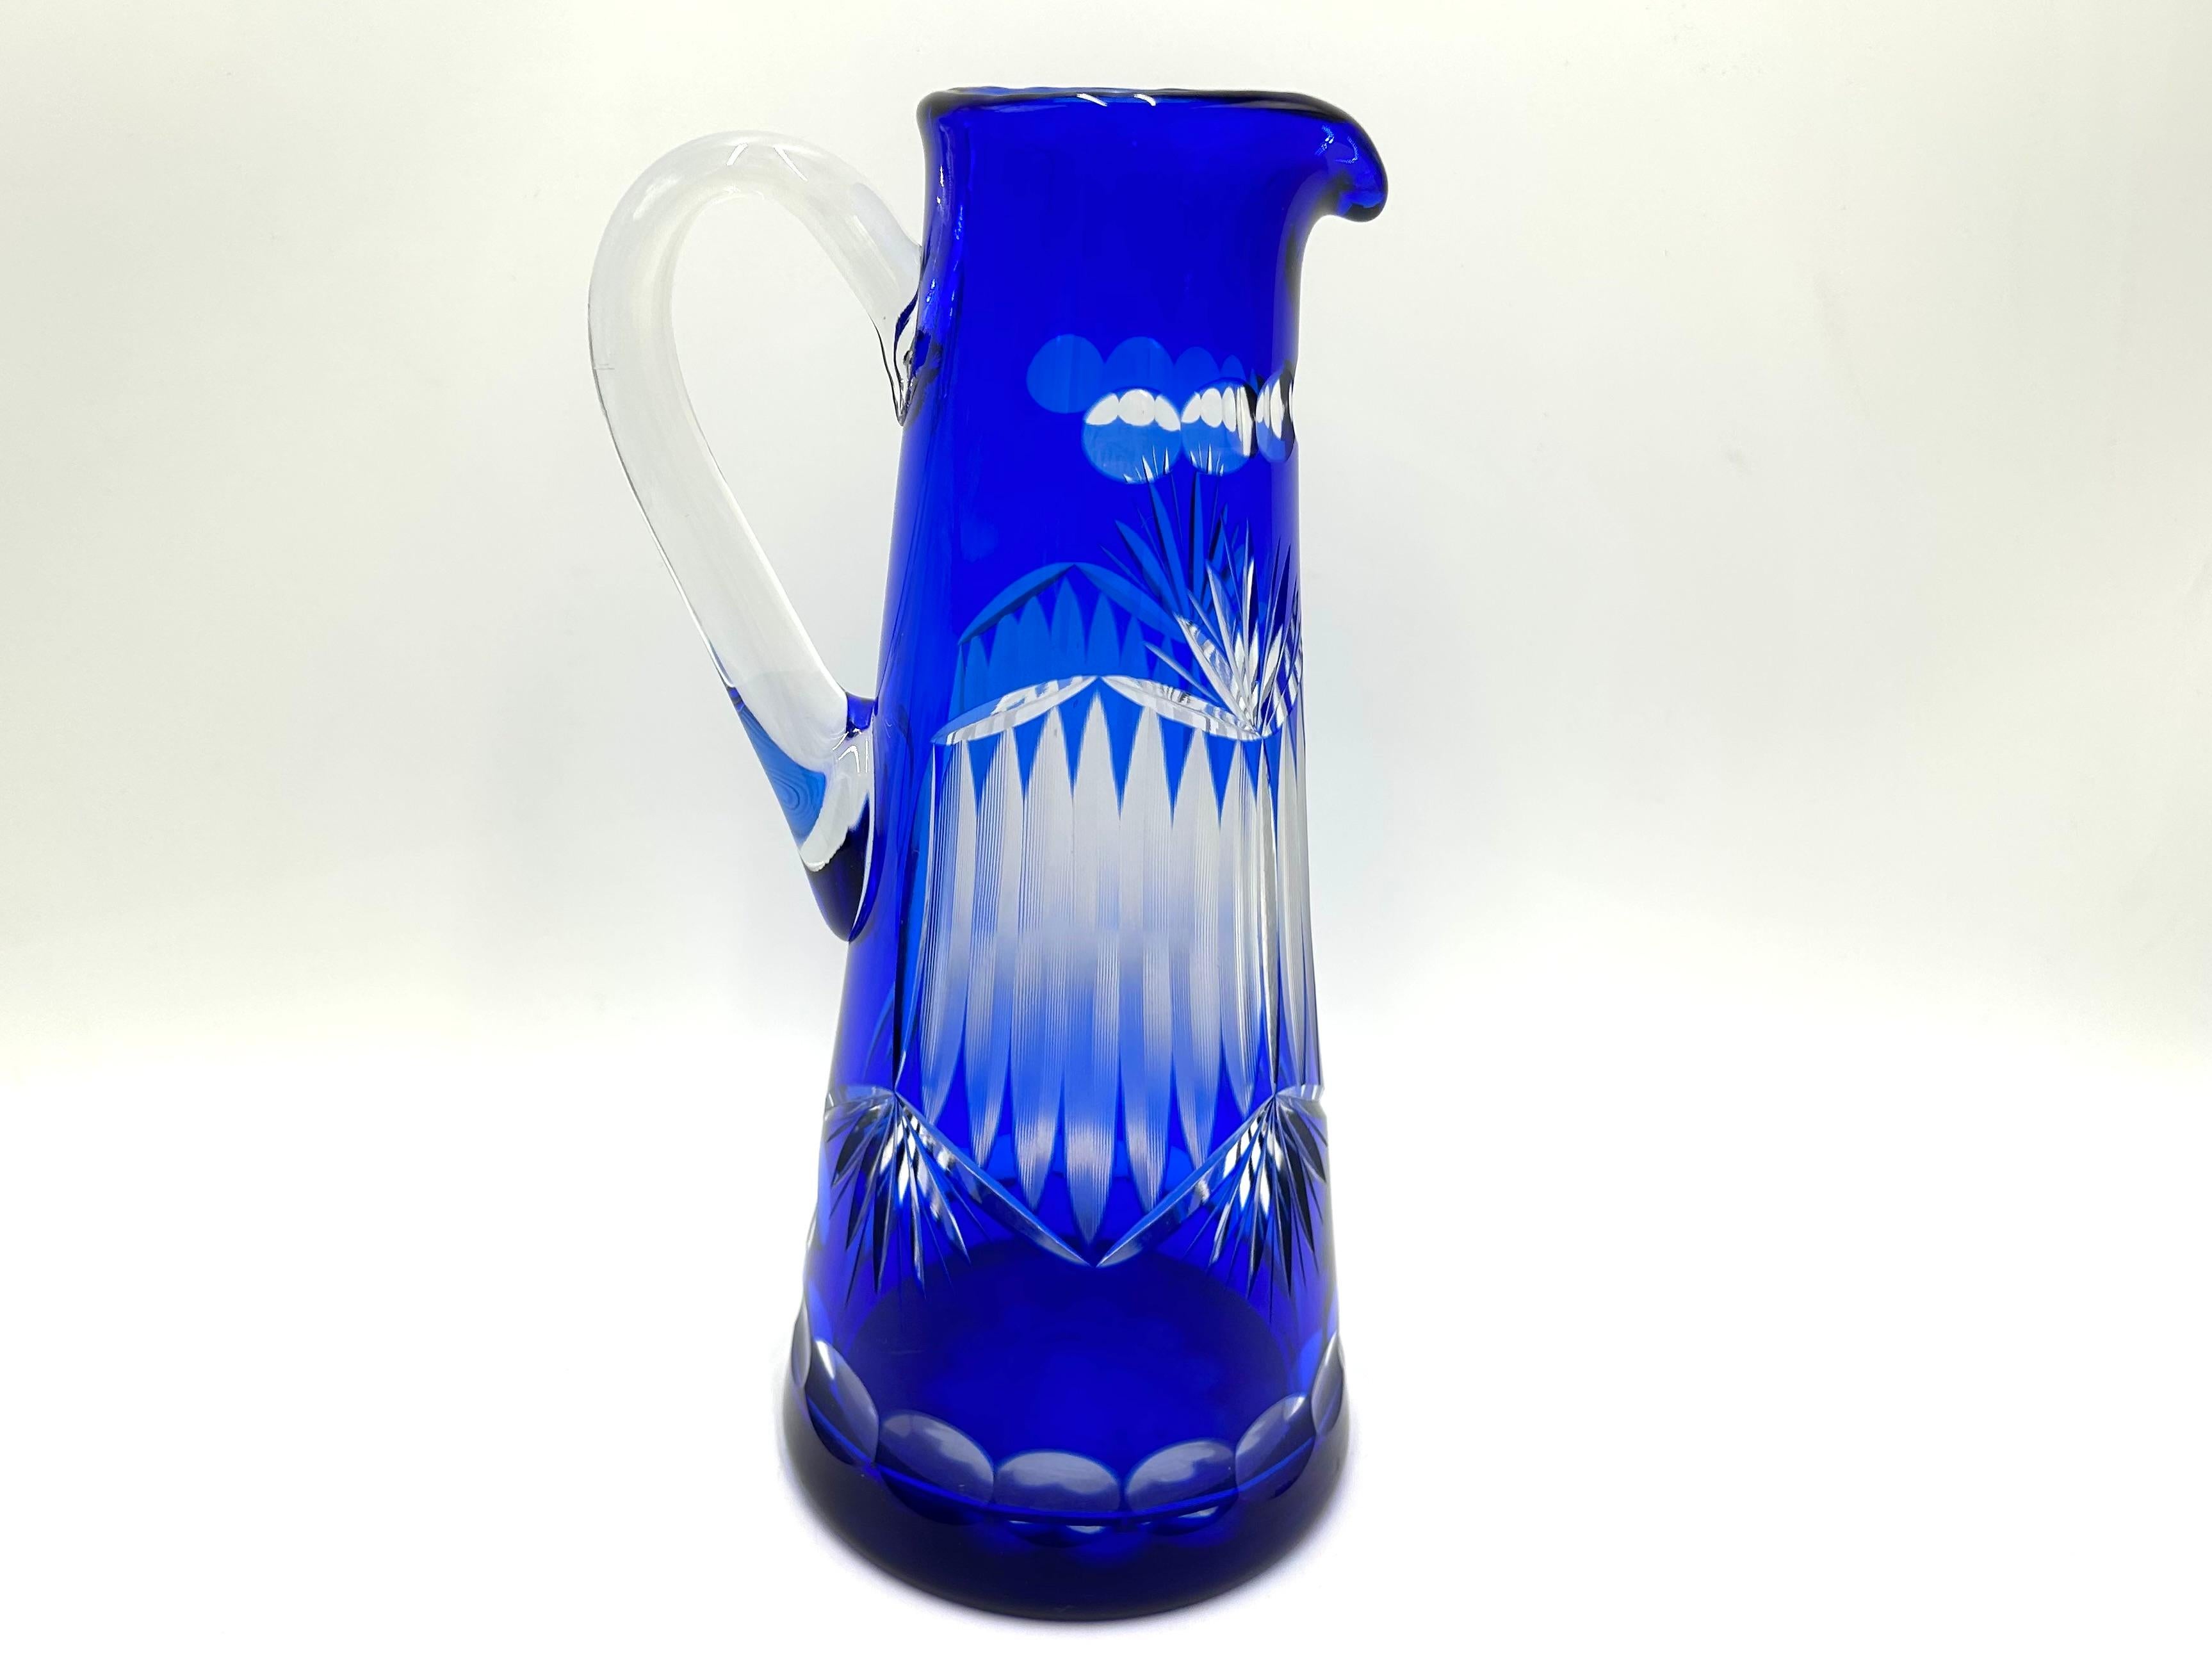 Cobalt blue crystal jug decorated with cuts

Made in Poland in the 1960s.

Very good condition, no damage

height: 28cm, width 15cm, depth 12cm